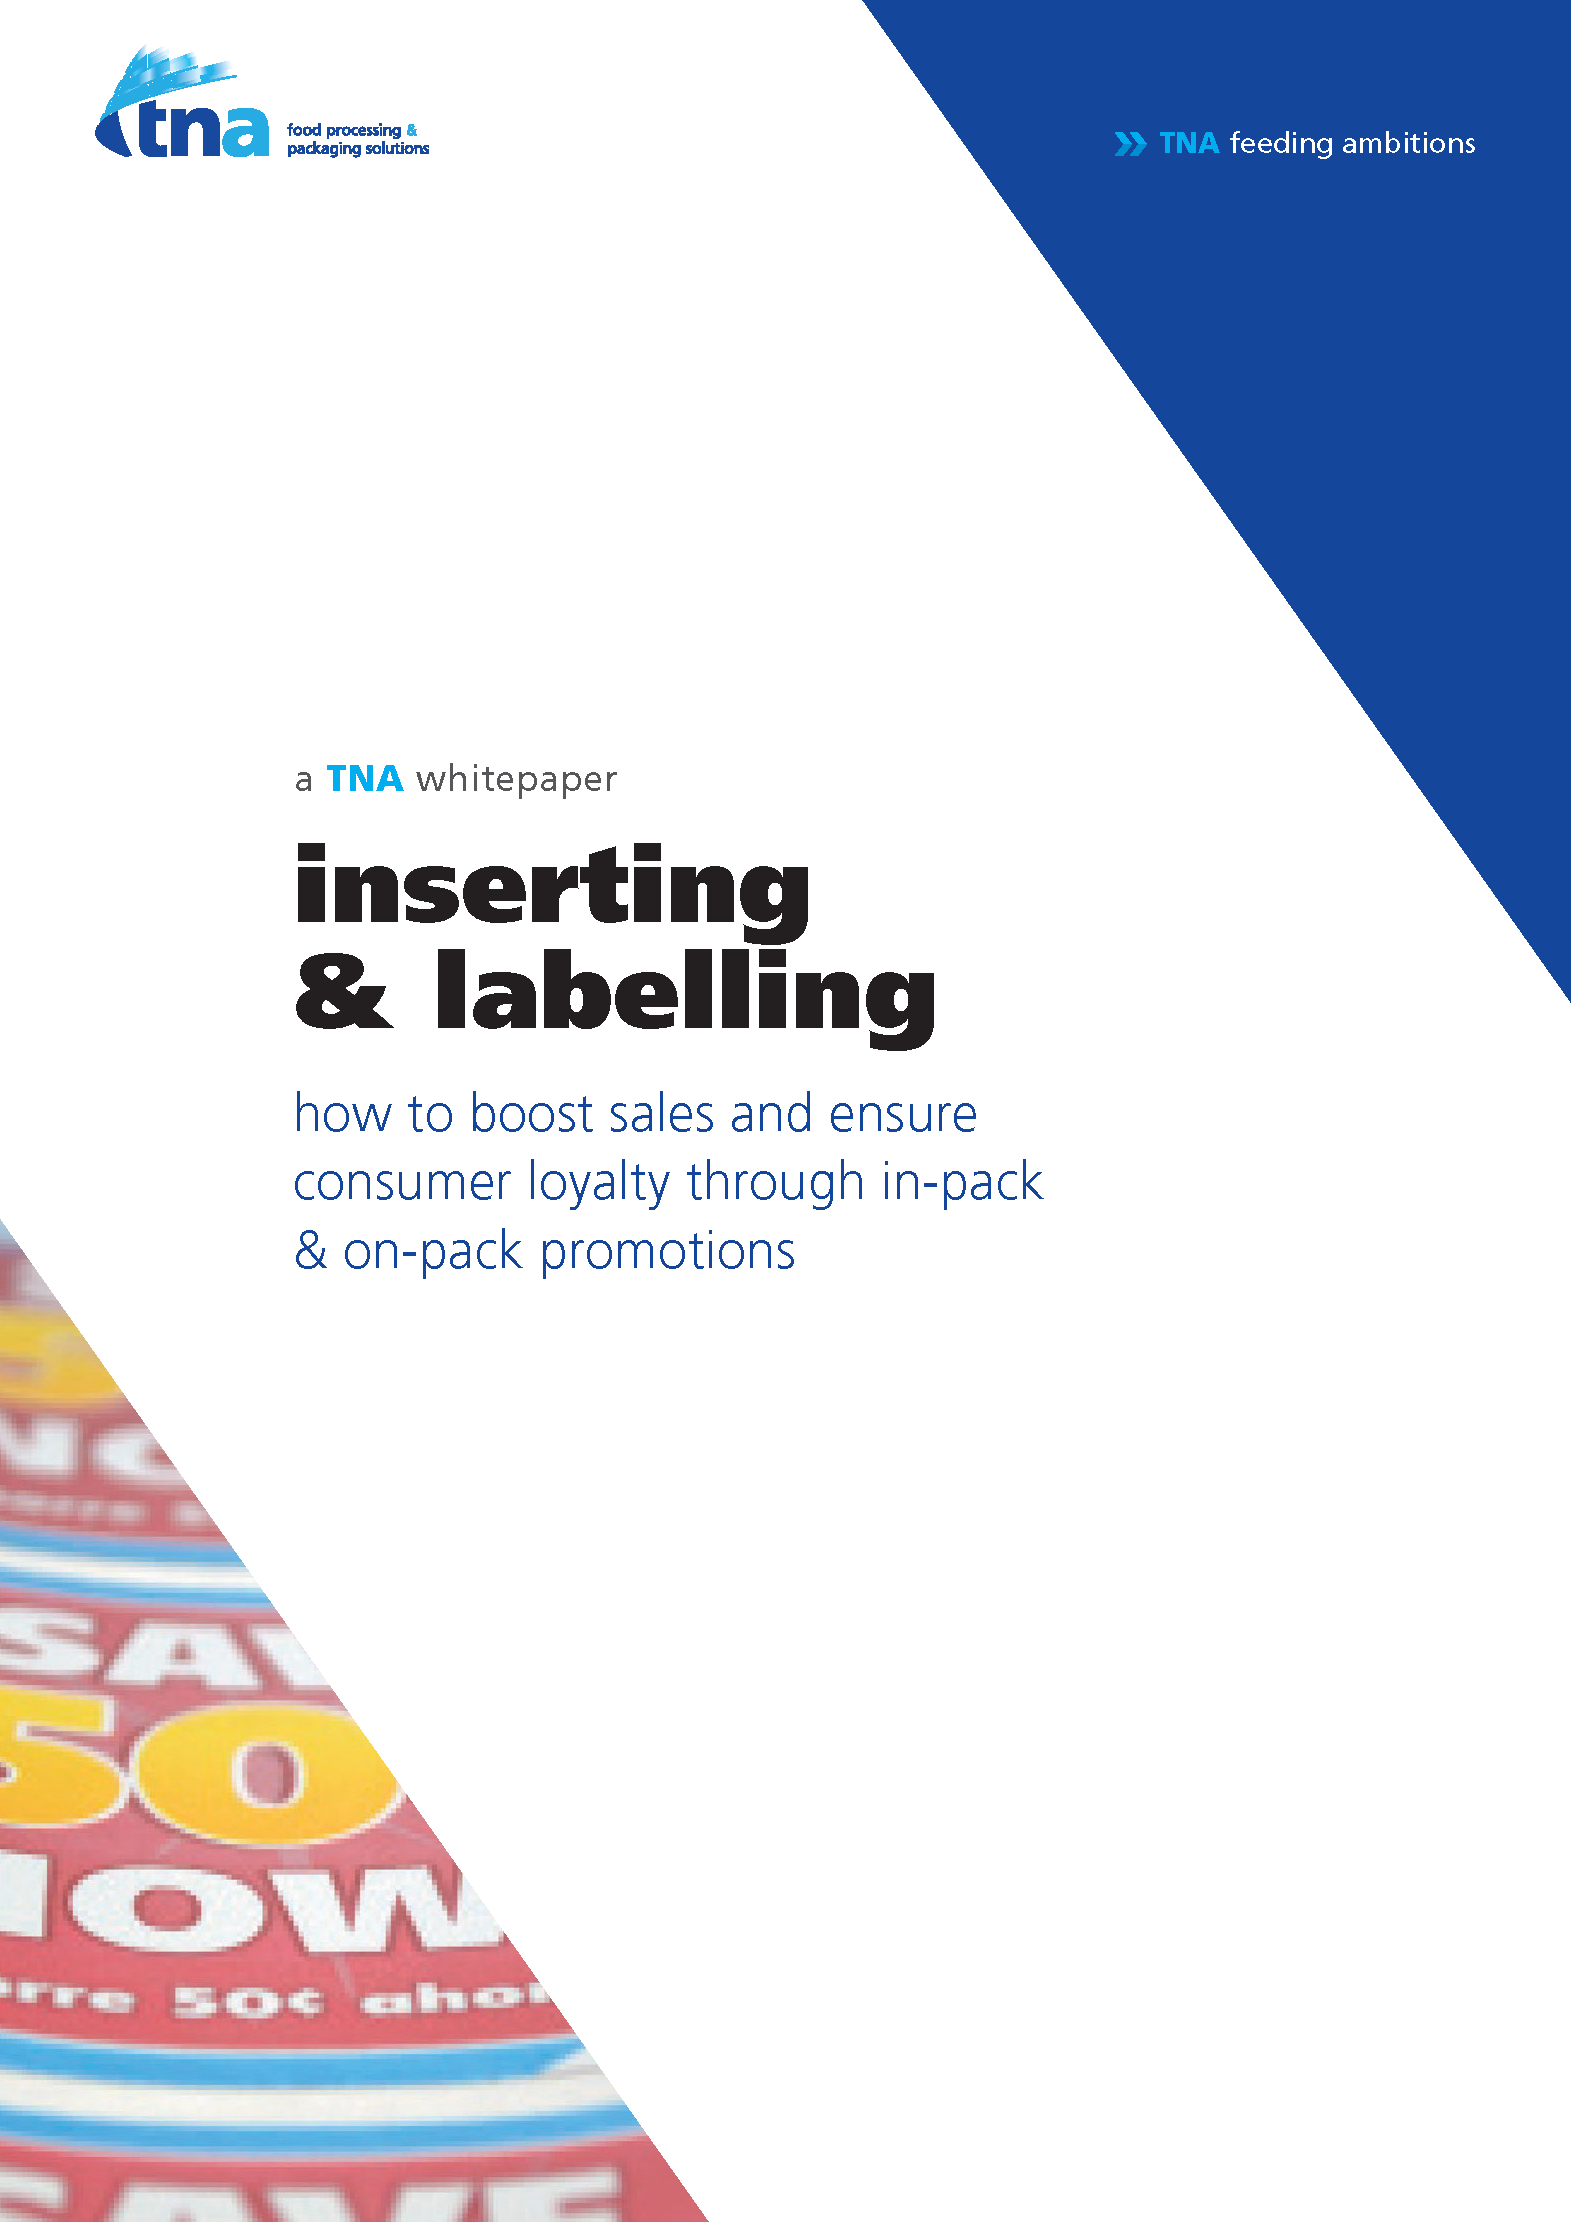 How to Boost Sales and Ensure Consumer Loyalty Through in-Pack & On-Pack Promotions